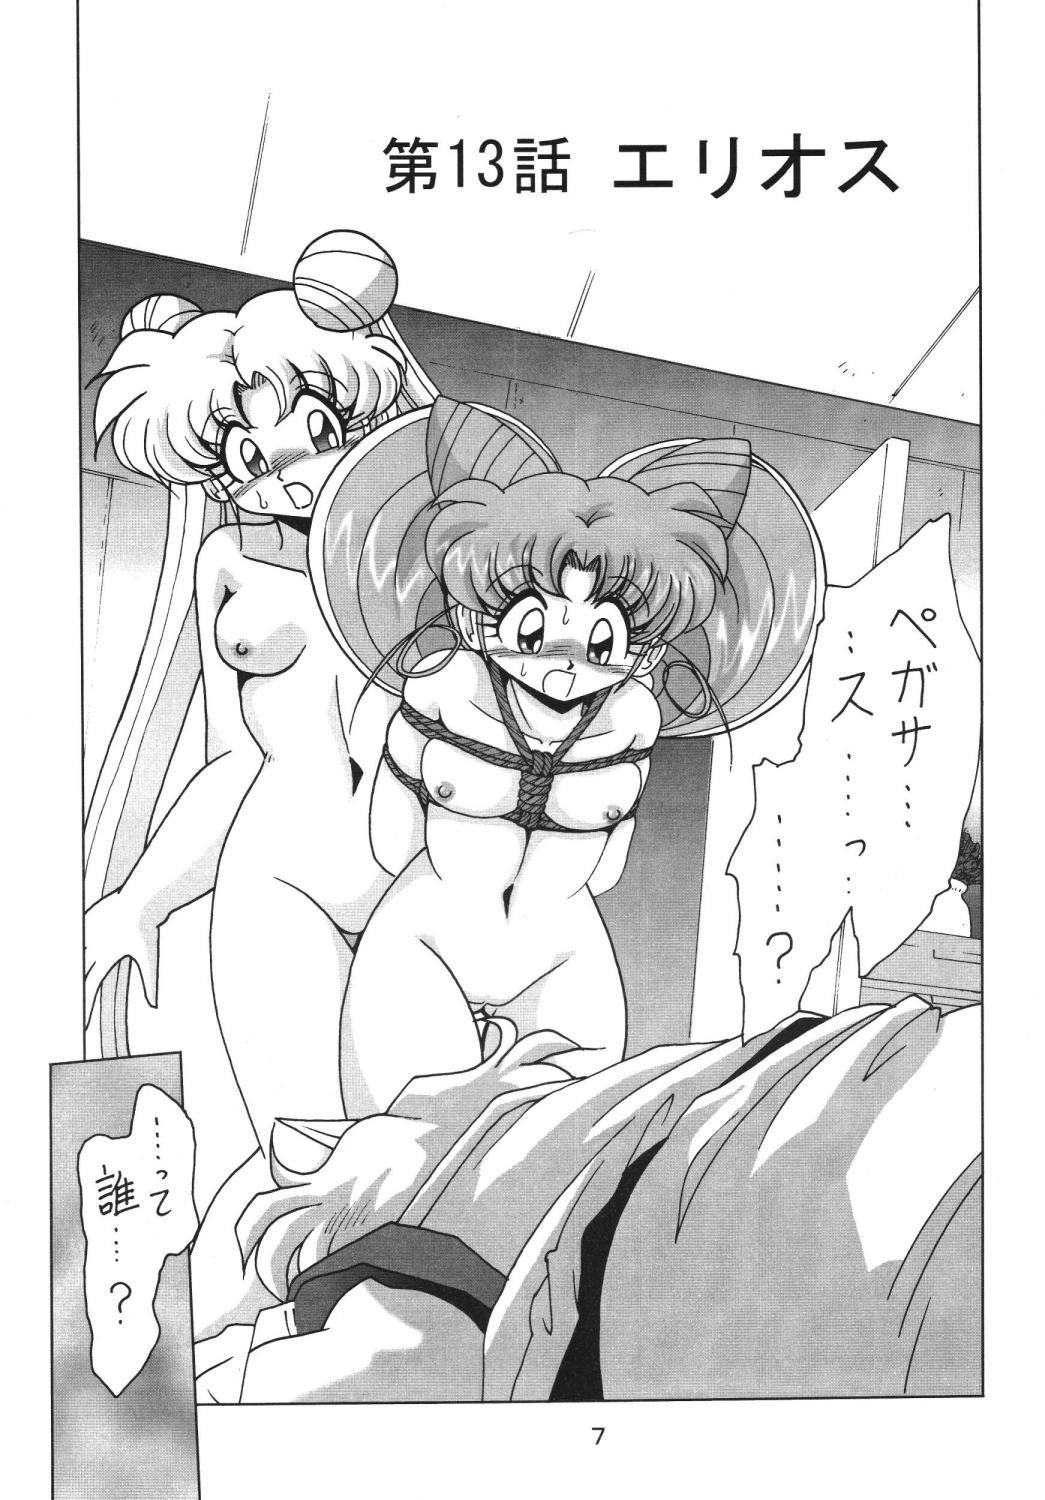 Reverse Cowgirl Silent Saturn SS vol. 7 - Sailor moon Vietnamese - Page 6